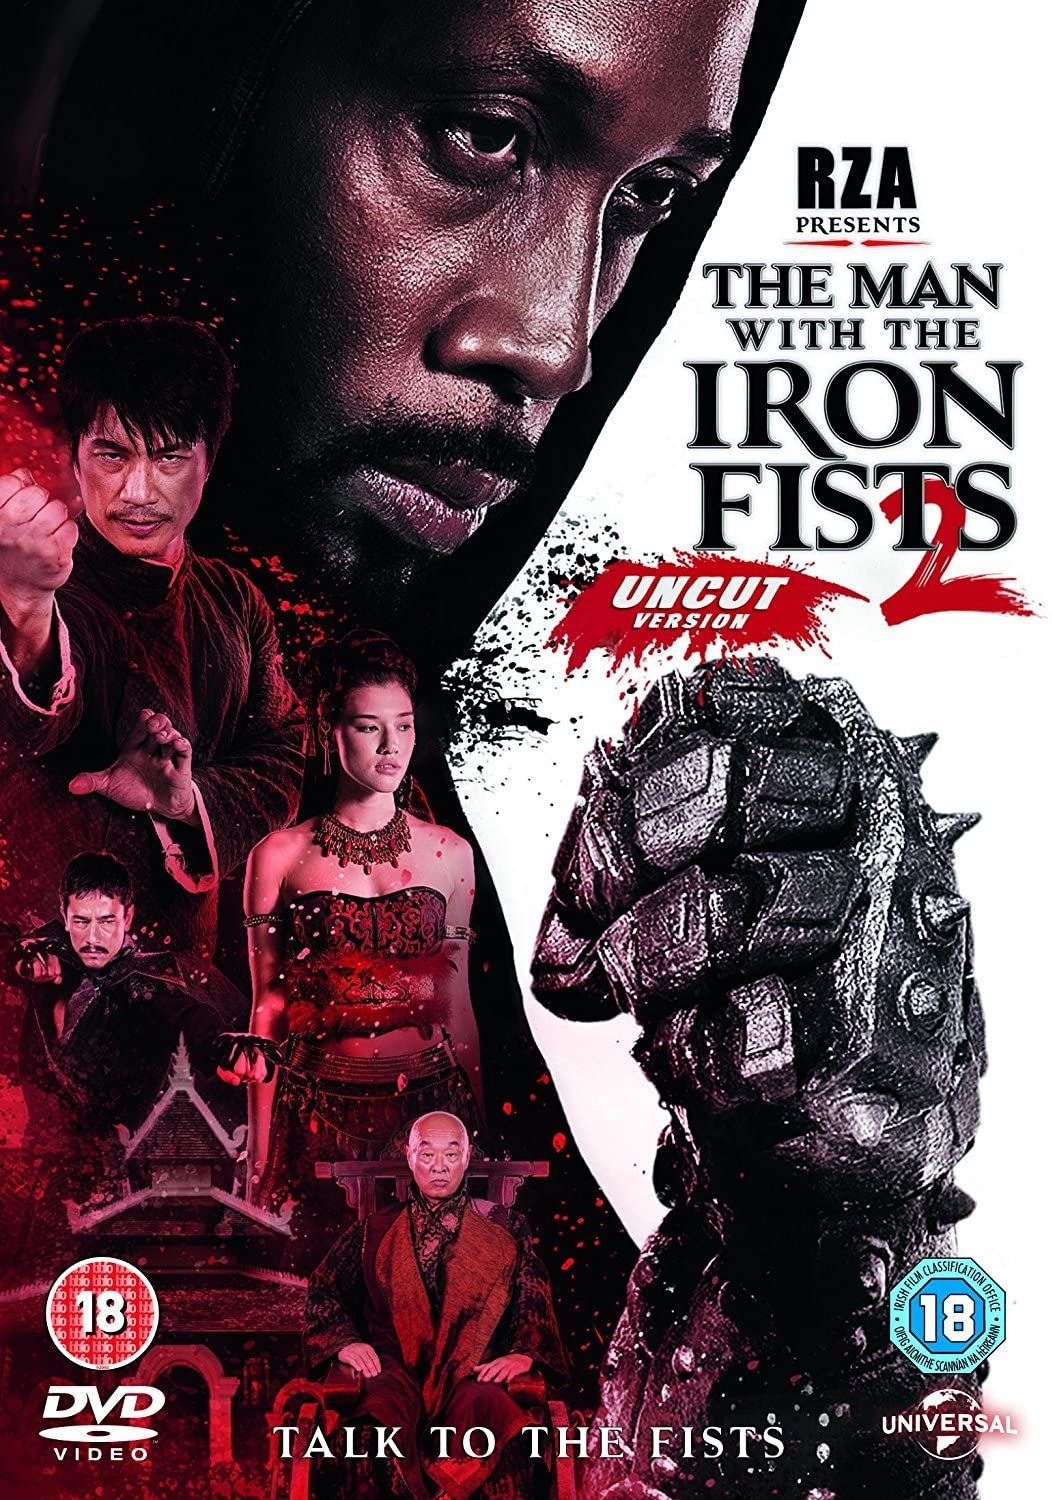 The Man With The Iron Fists 2 [2014] - Action/Martial Arts [DVD]